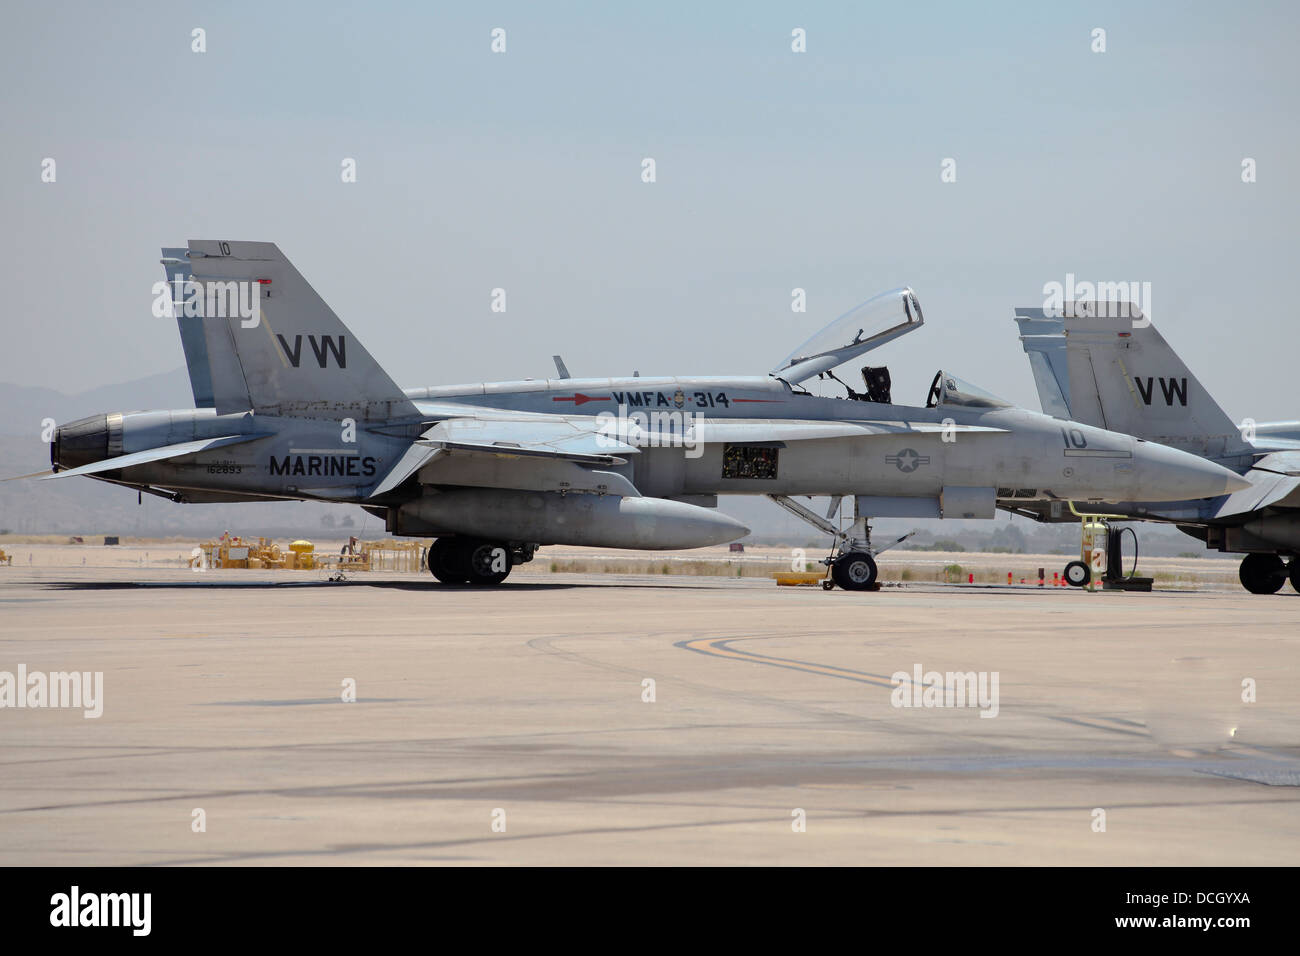 An F/A-18C Hornet of United States Marine Corps squadron VMFA-314, at Marine Corps Air Station Miramar, California. Stock Photo